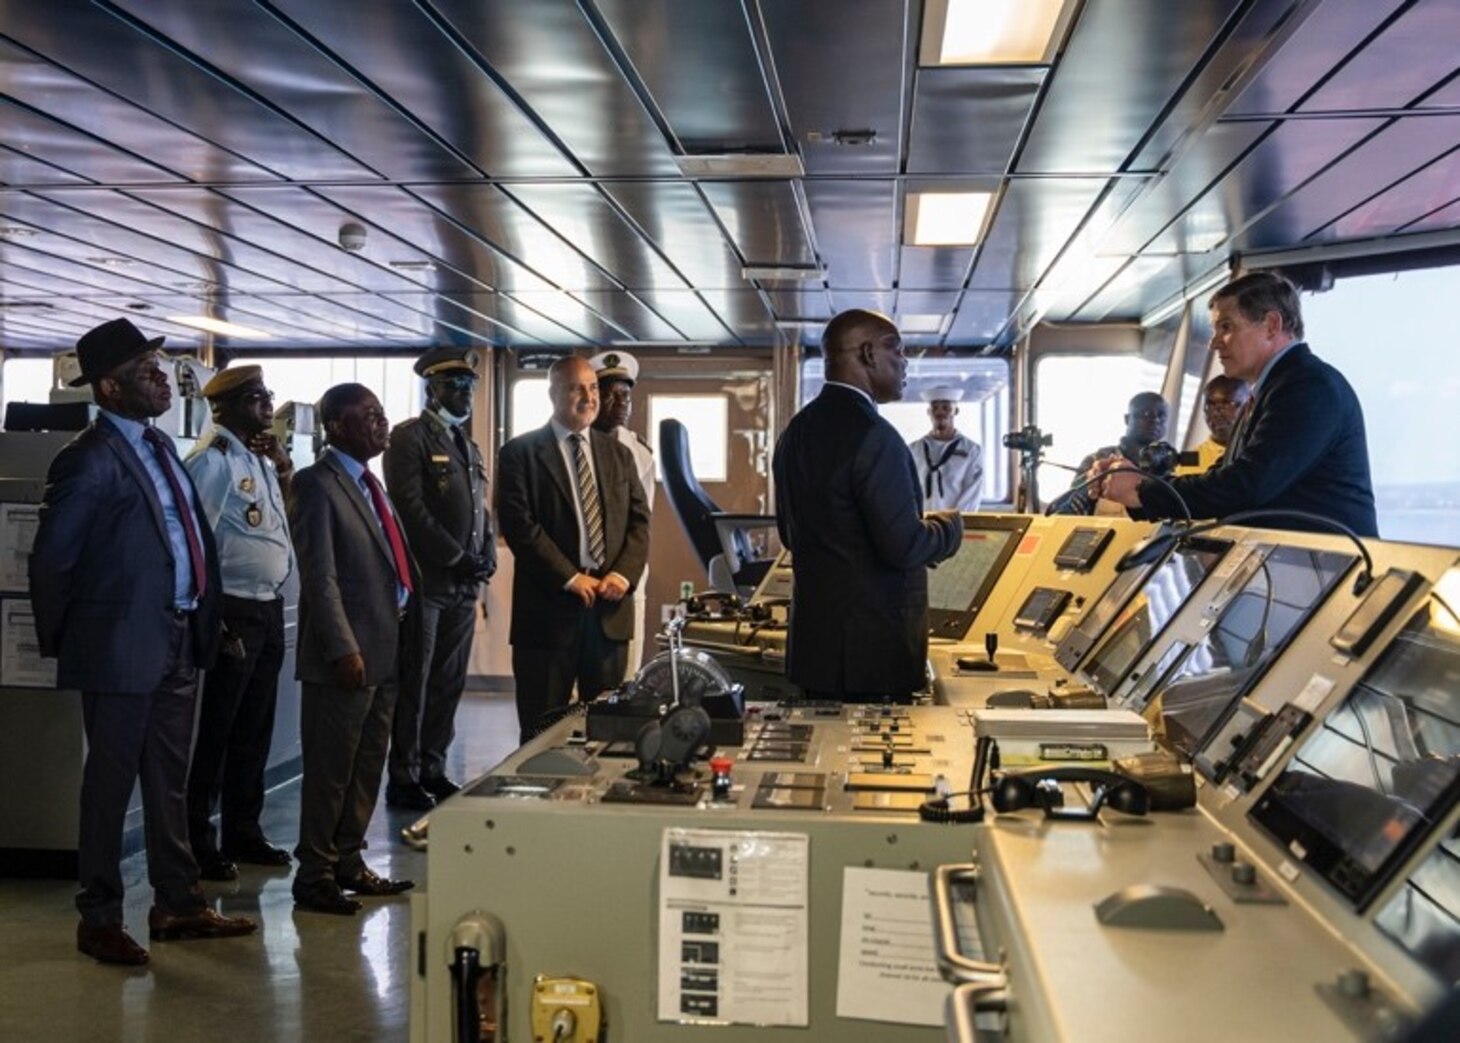 Sep. 12, 2022) Joseph Dark, right, ship's master, briefs Republic of Congo senior military leaders, embassy staff and dignitaries during a tour aboard the Lewis B. Puller-class expeditionary sea base USS Hershel "Woody" Williams (ESB 4), Sep. 12, 2022. Hershel "Woody" Williams is rotationally deployed to the U.S. Naval Forces Africa area of operations, employed by U.S. Sixth Fleet, to defend U.S., allied and partner interests.